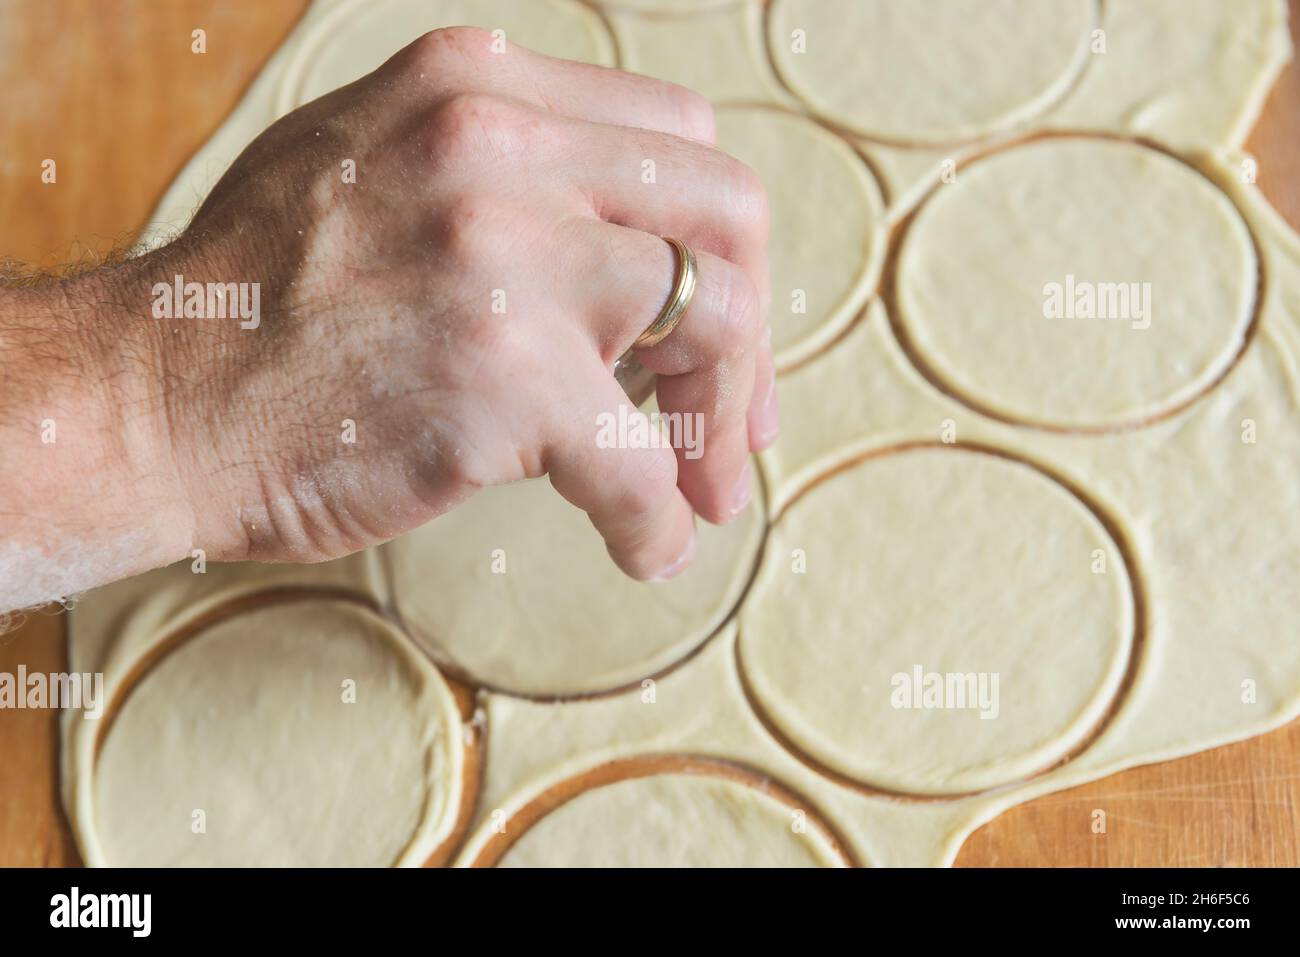 Making dumplings or pierogi, preparing rounded pieces of dough with glass Stock Photo